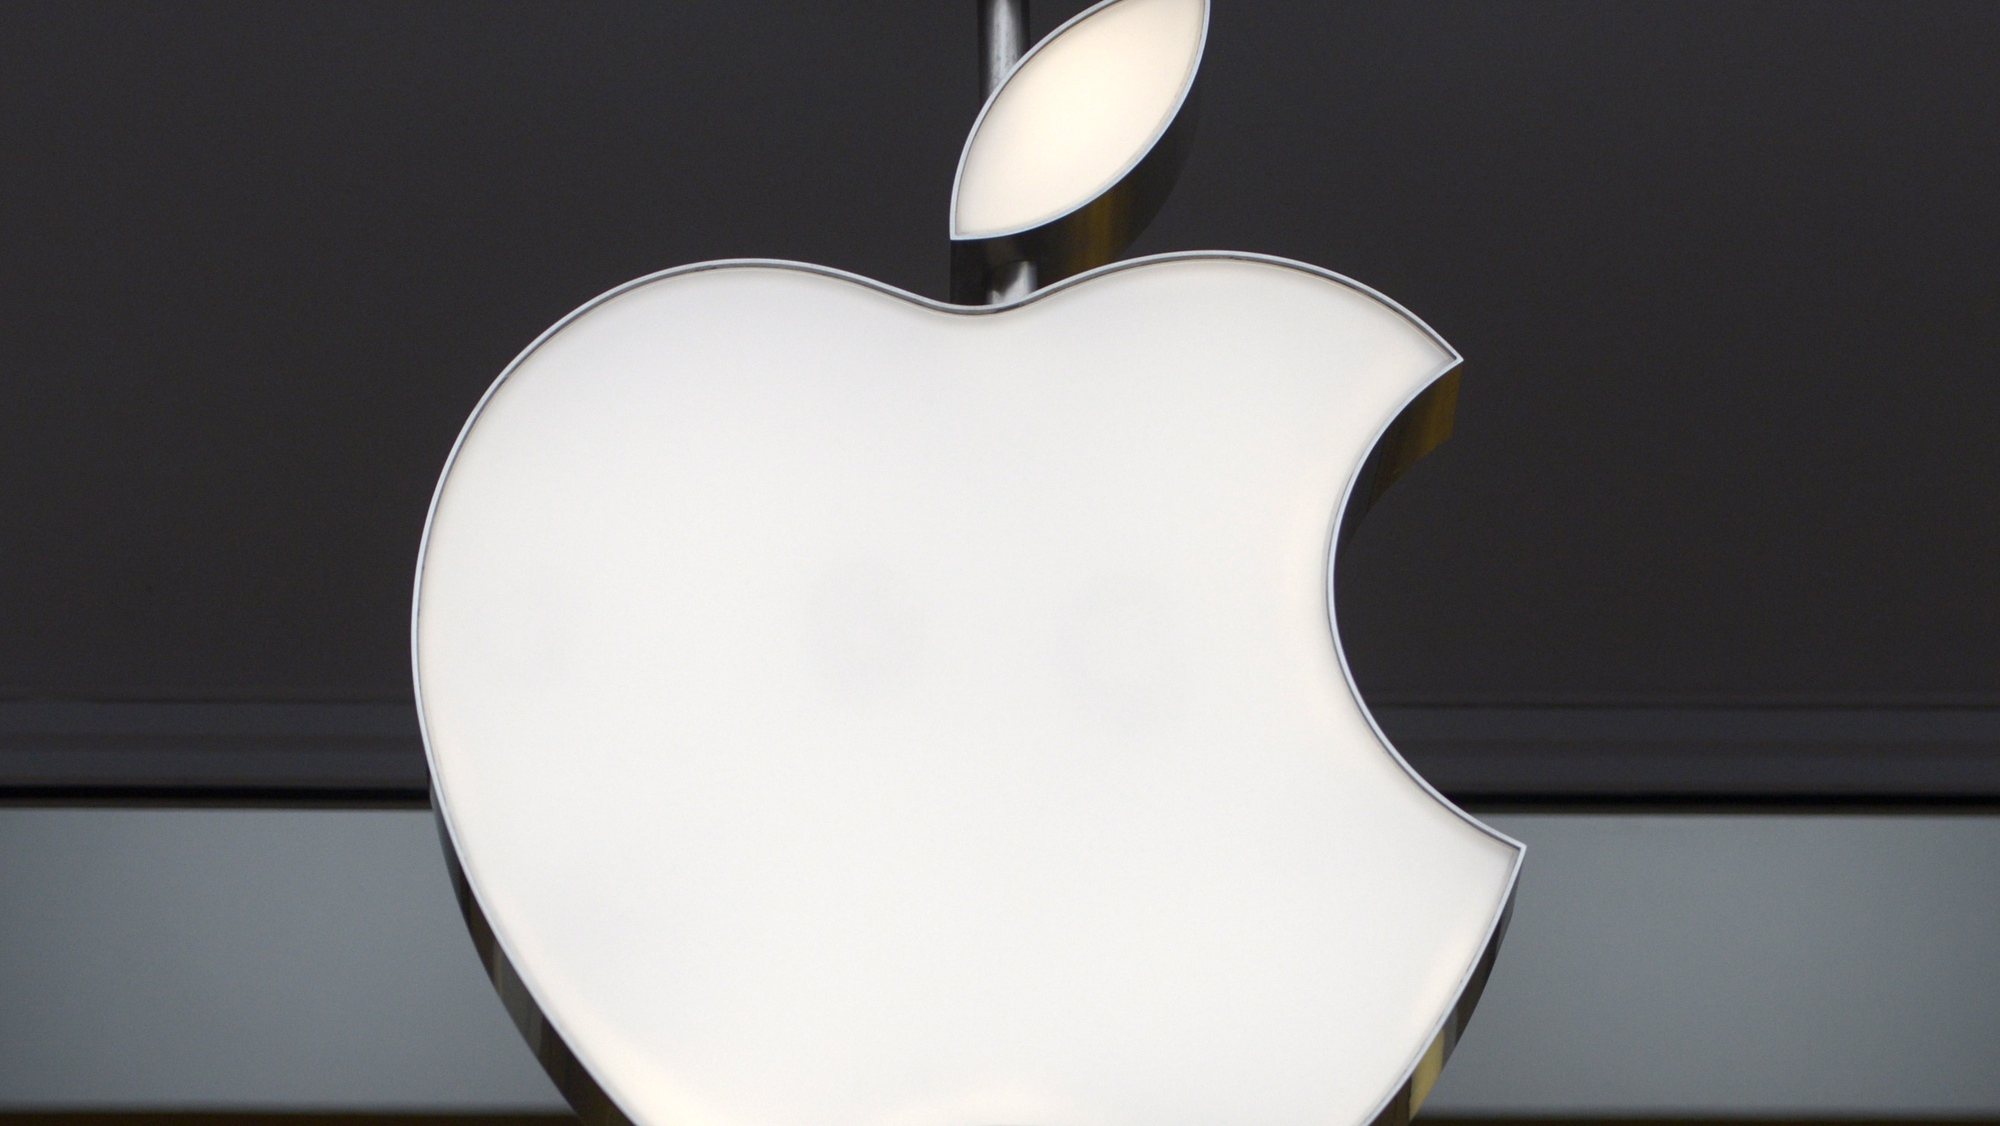 epa08547009 (FILE) - The company&#039;s logo at an Apple Store in Washington, DC, USA, 27 January 2015 (reissued 15 July 2020). The General Court of the European Union in Luxembourg announced on 15 July 2020 that it has annulled a 2016 decision taken by the Commission regarding the Irish tax rulings in favour of Apple. Europe&#039;s second-highest court said that Apple will not have to pay Ireland 13 billion euros in back taxes after winning an appeal. *** Local Caption *** 53809001  EPA/SHAWN THEW *** Local Caption *** 53809001